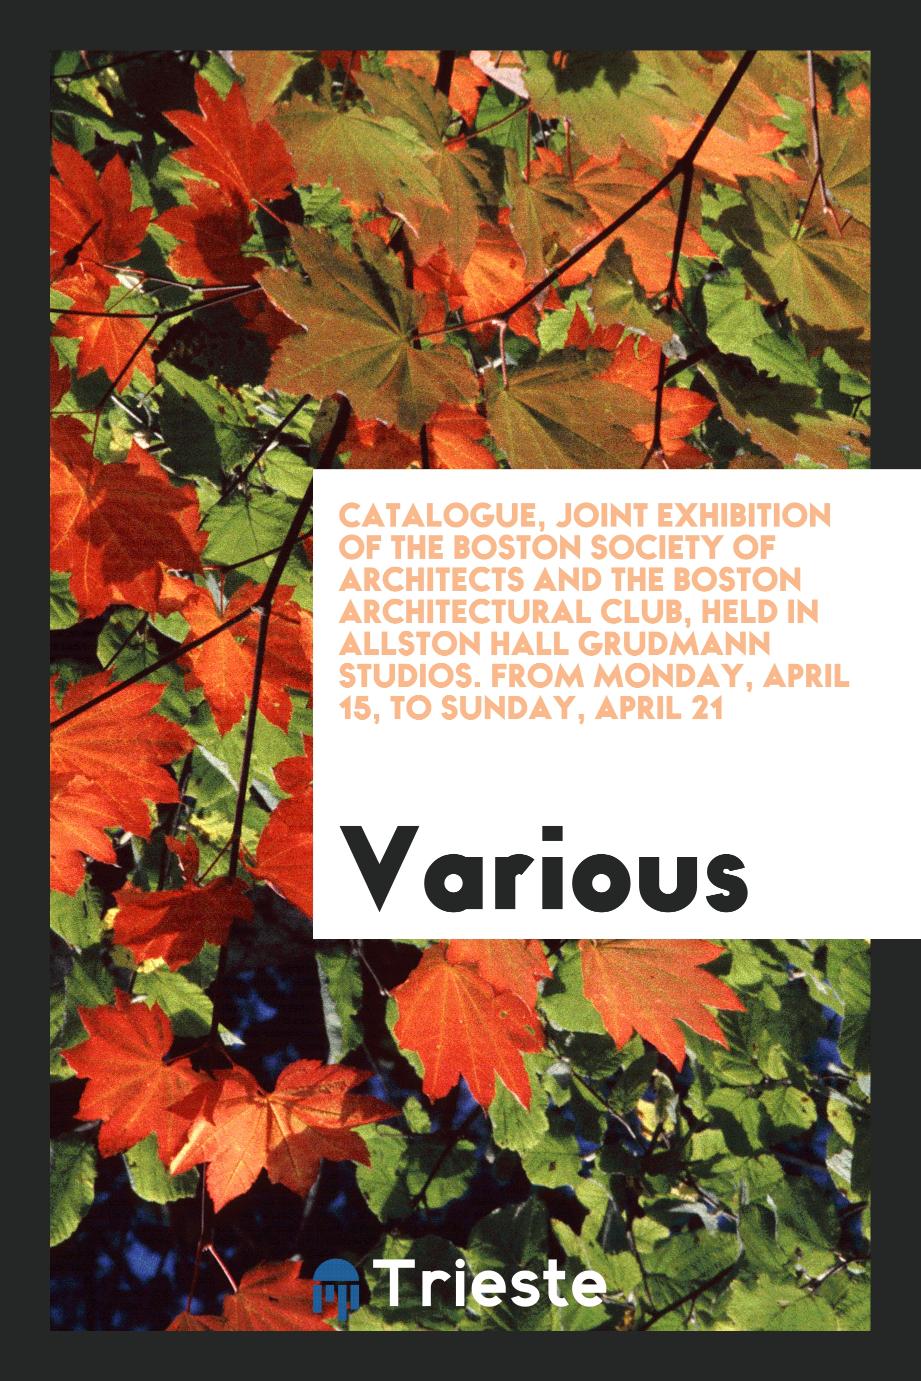 Catalogue, Joint Exhibition of the Boston Society of Architects and the Boston Architectural Club, Held in Allston Hall Grudmann Studios. From Monday, April 15, to Sunday, April 21